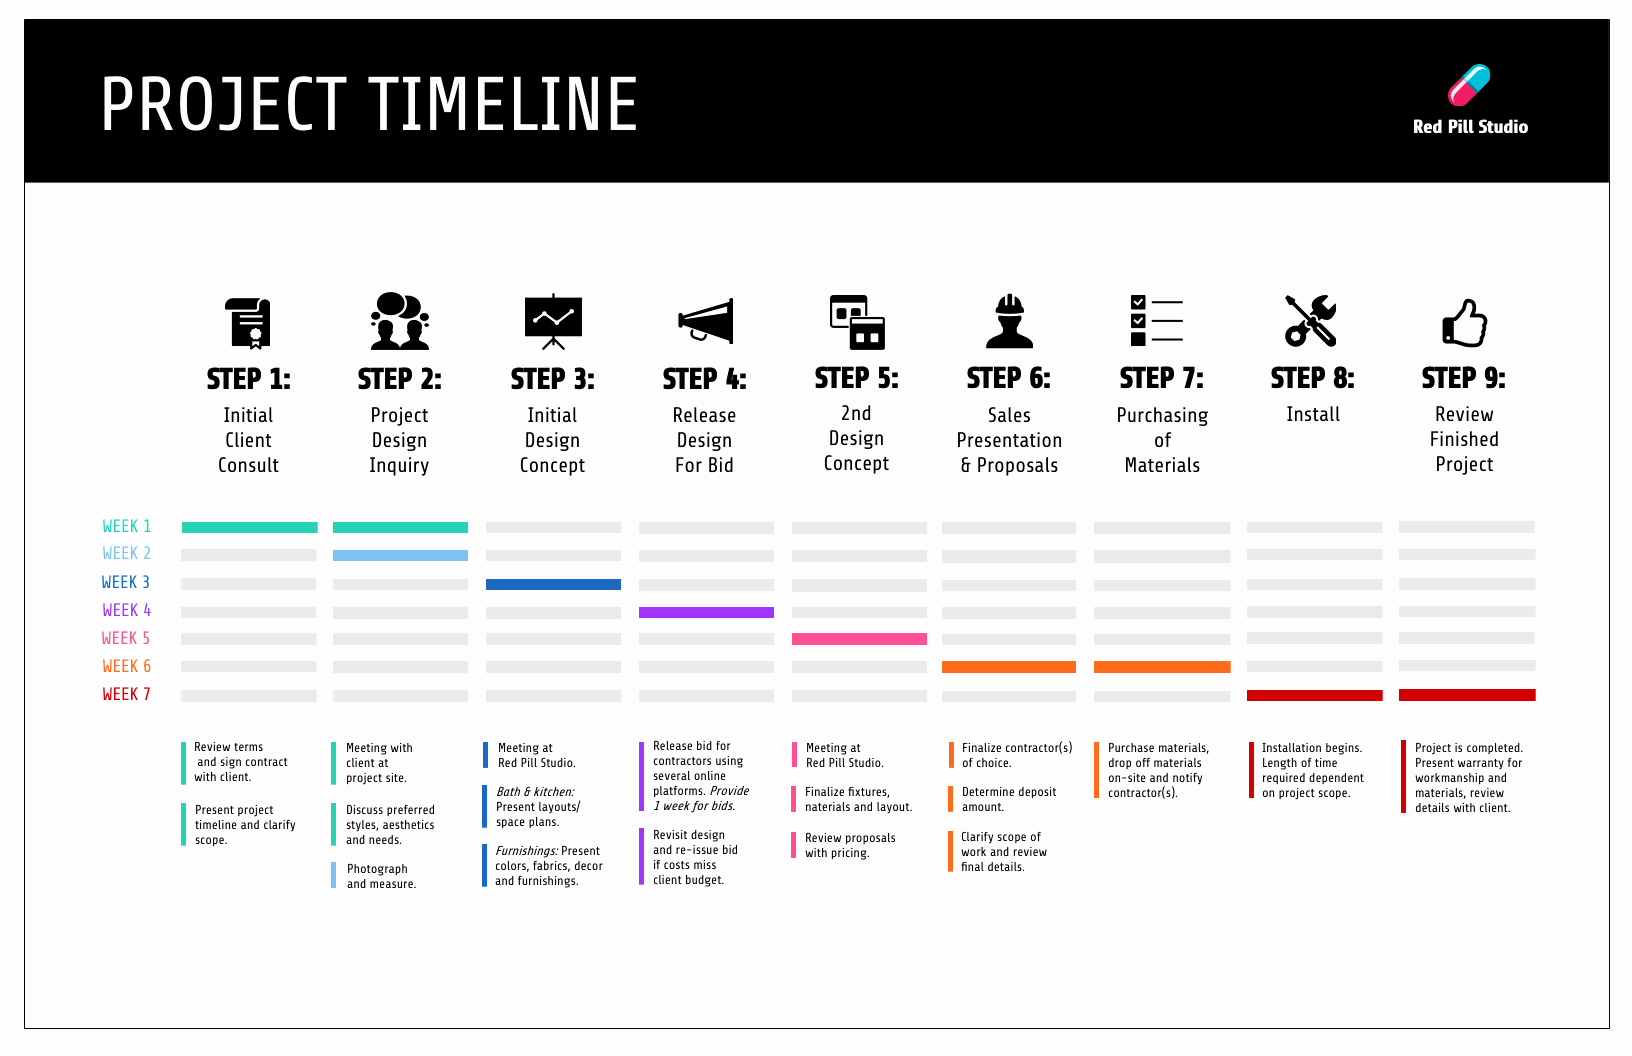 Project Work Plan Template Luxury 15 Project Plan Templates &amp; Examples to Align Your Team